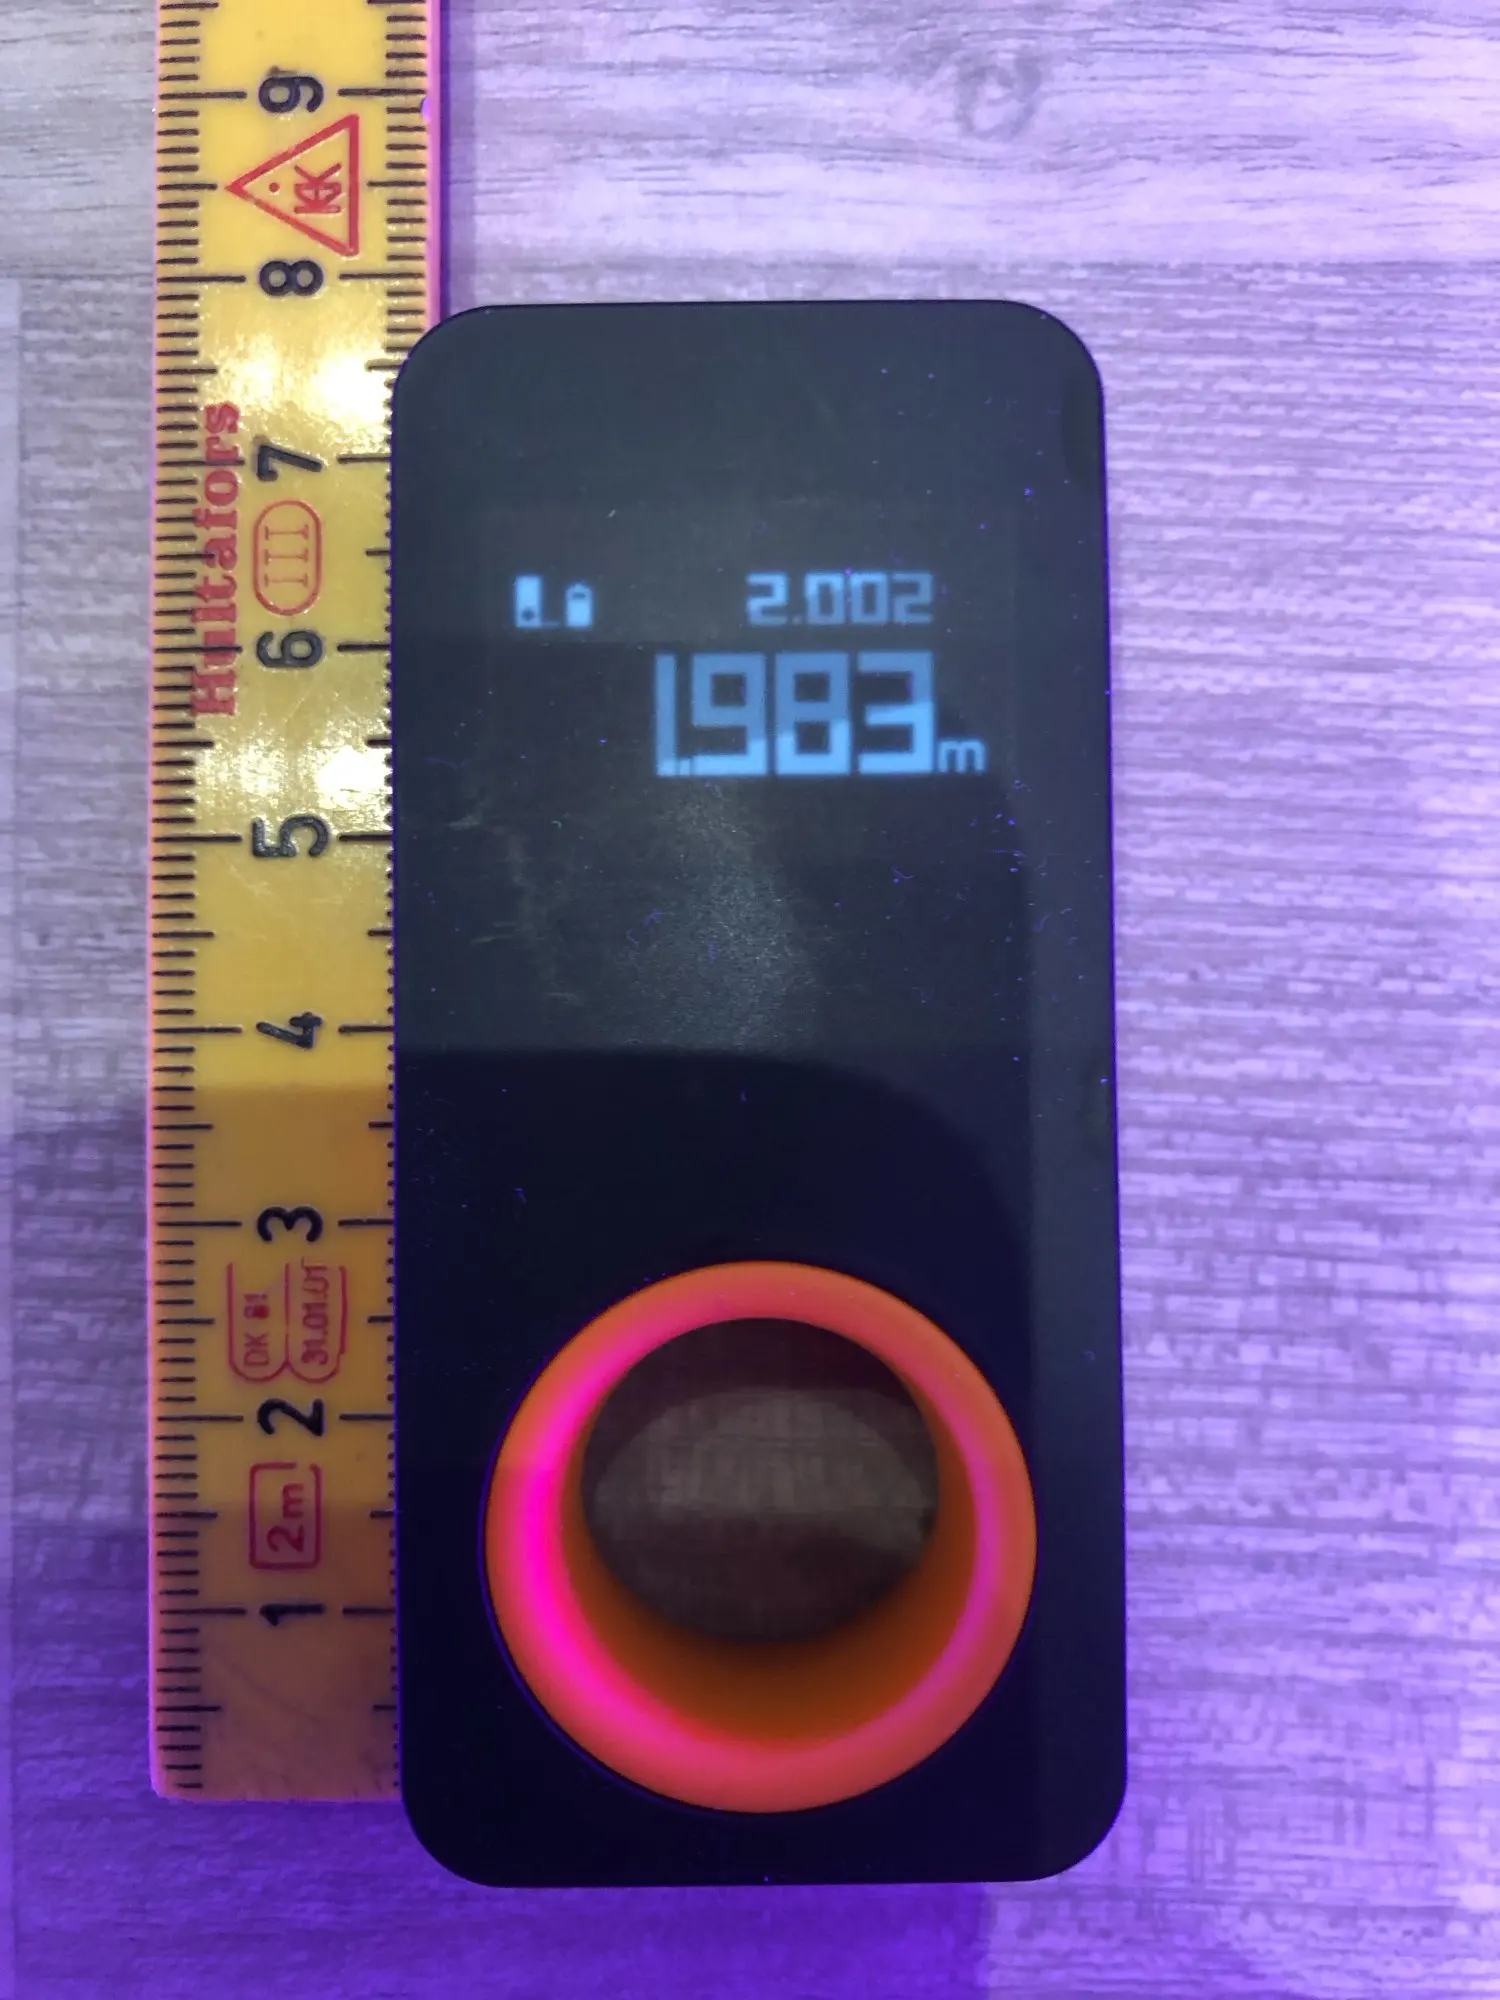 Measure Smarter, Not Harder with HOTO Laser Tape Measure - 30M Smart Laser Rangefinder with OLED Display and APP Connectivity photo review